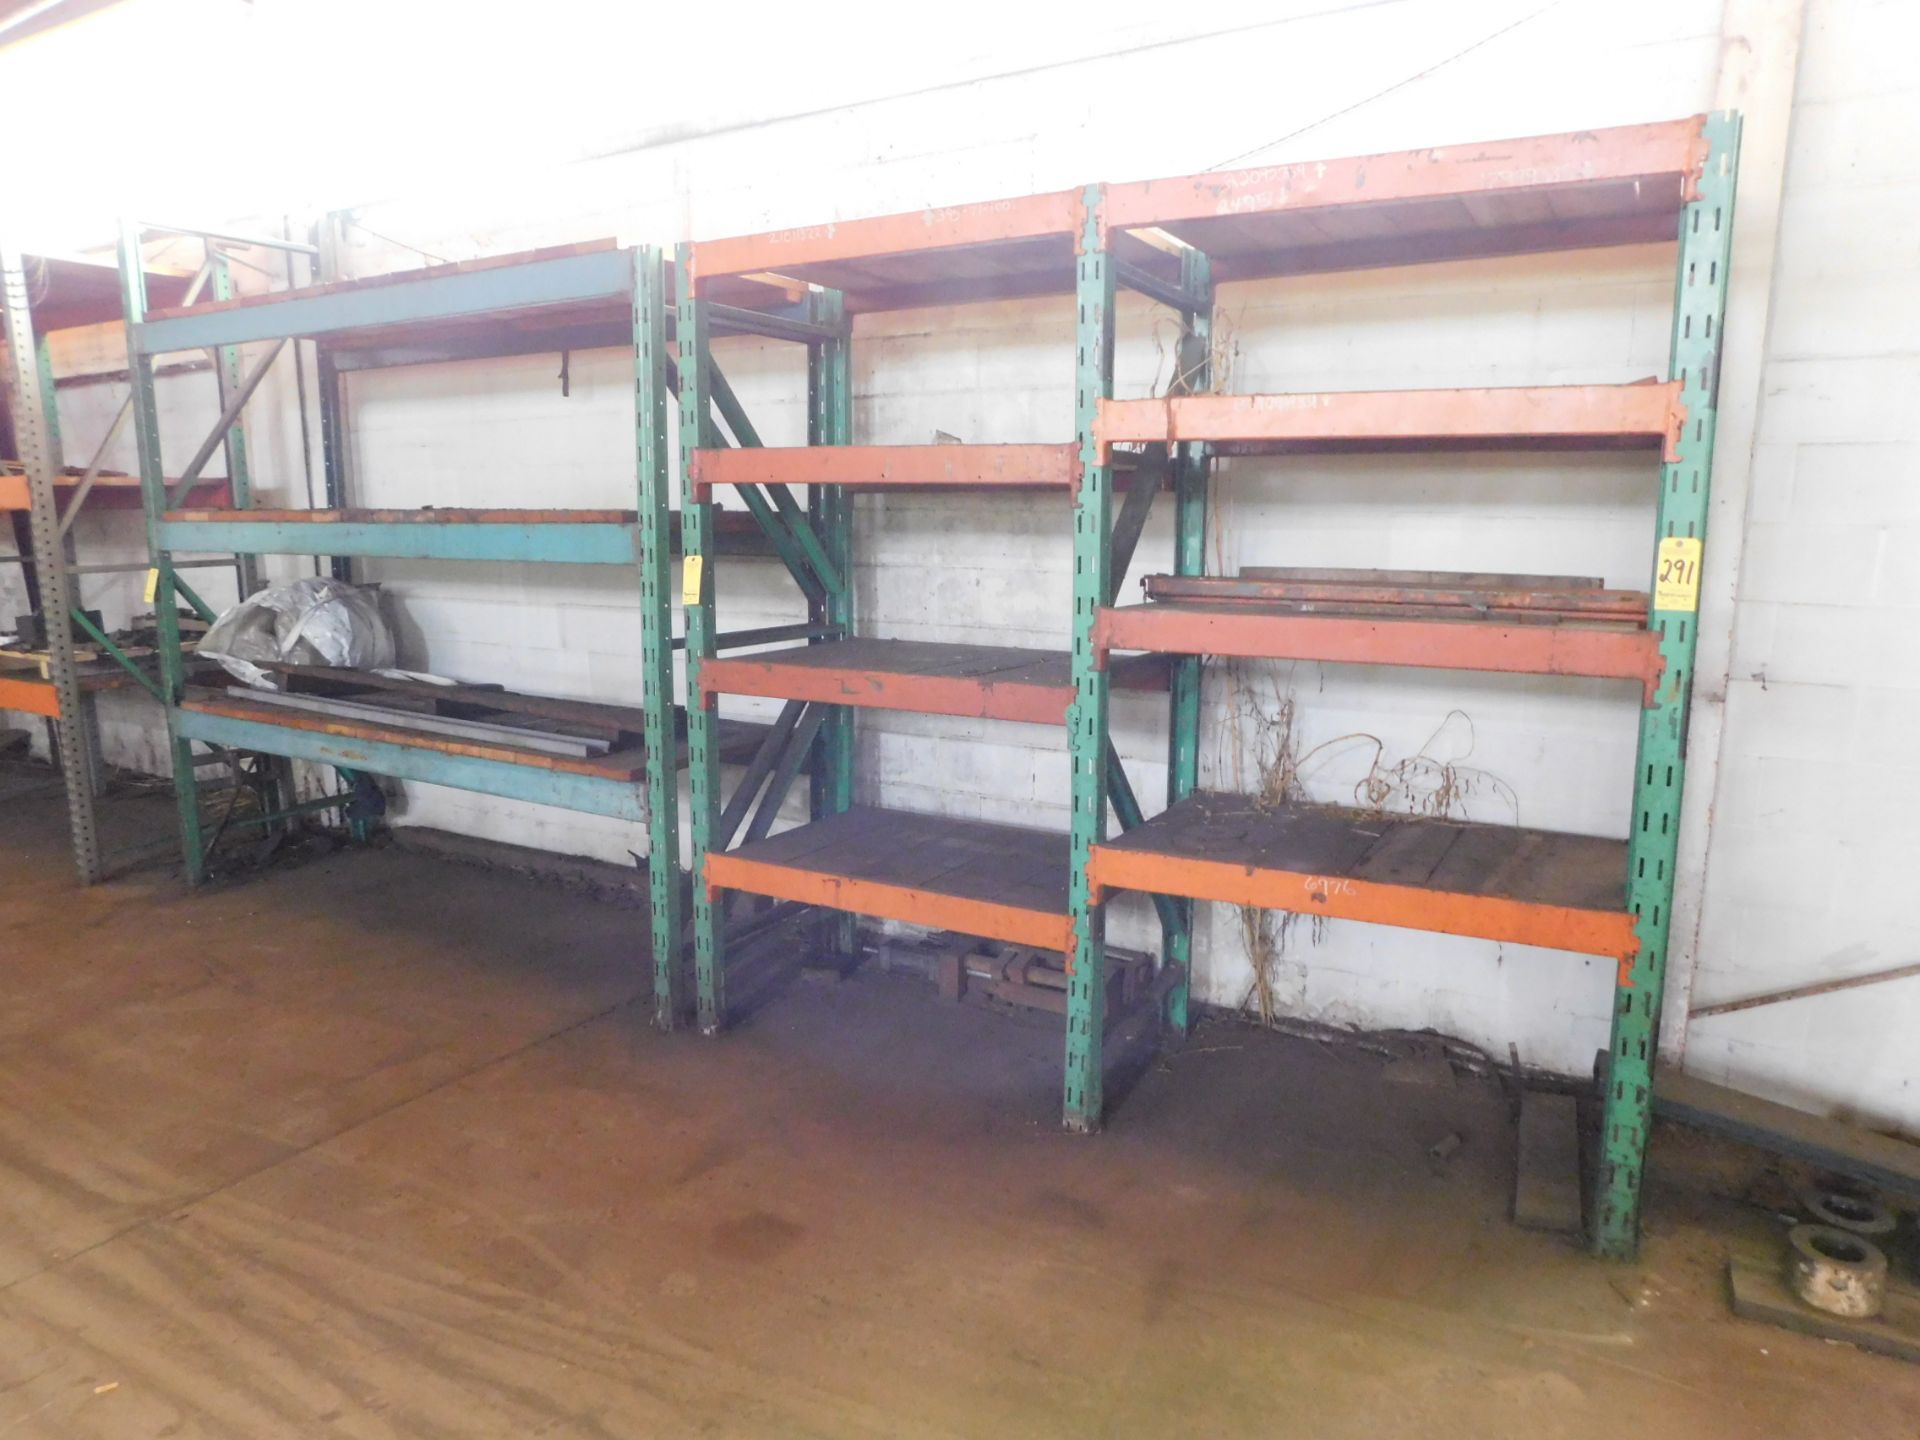 Pallet Shelving, (2) Sections, 8' High X 4' Wide X 32" Deep, and (1) Section 8' High X 114" Wide X